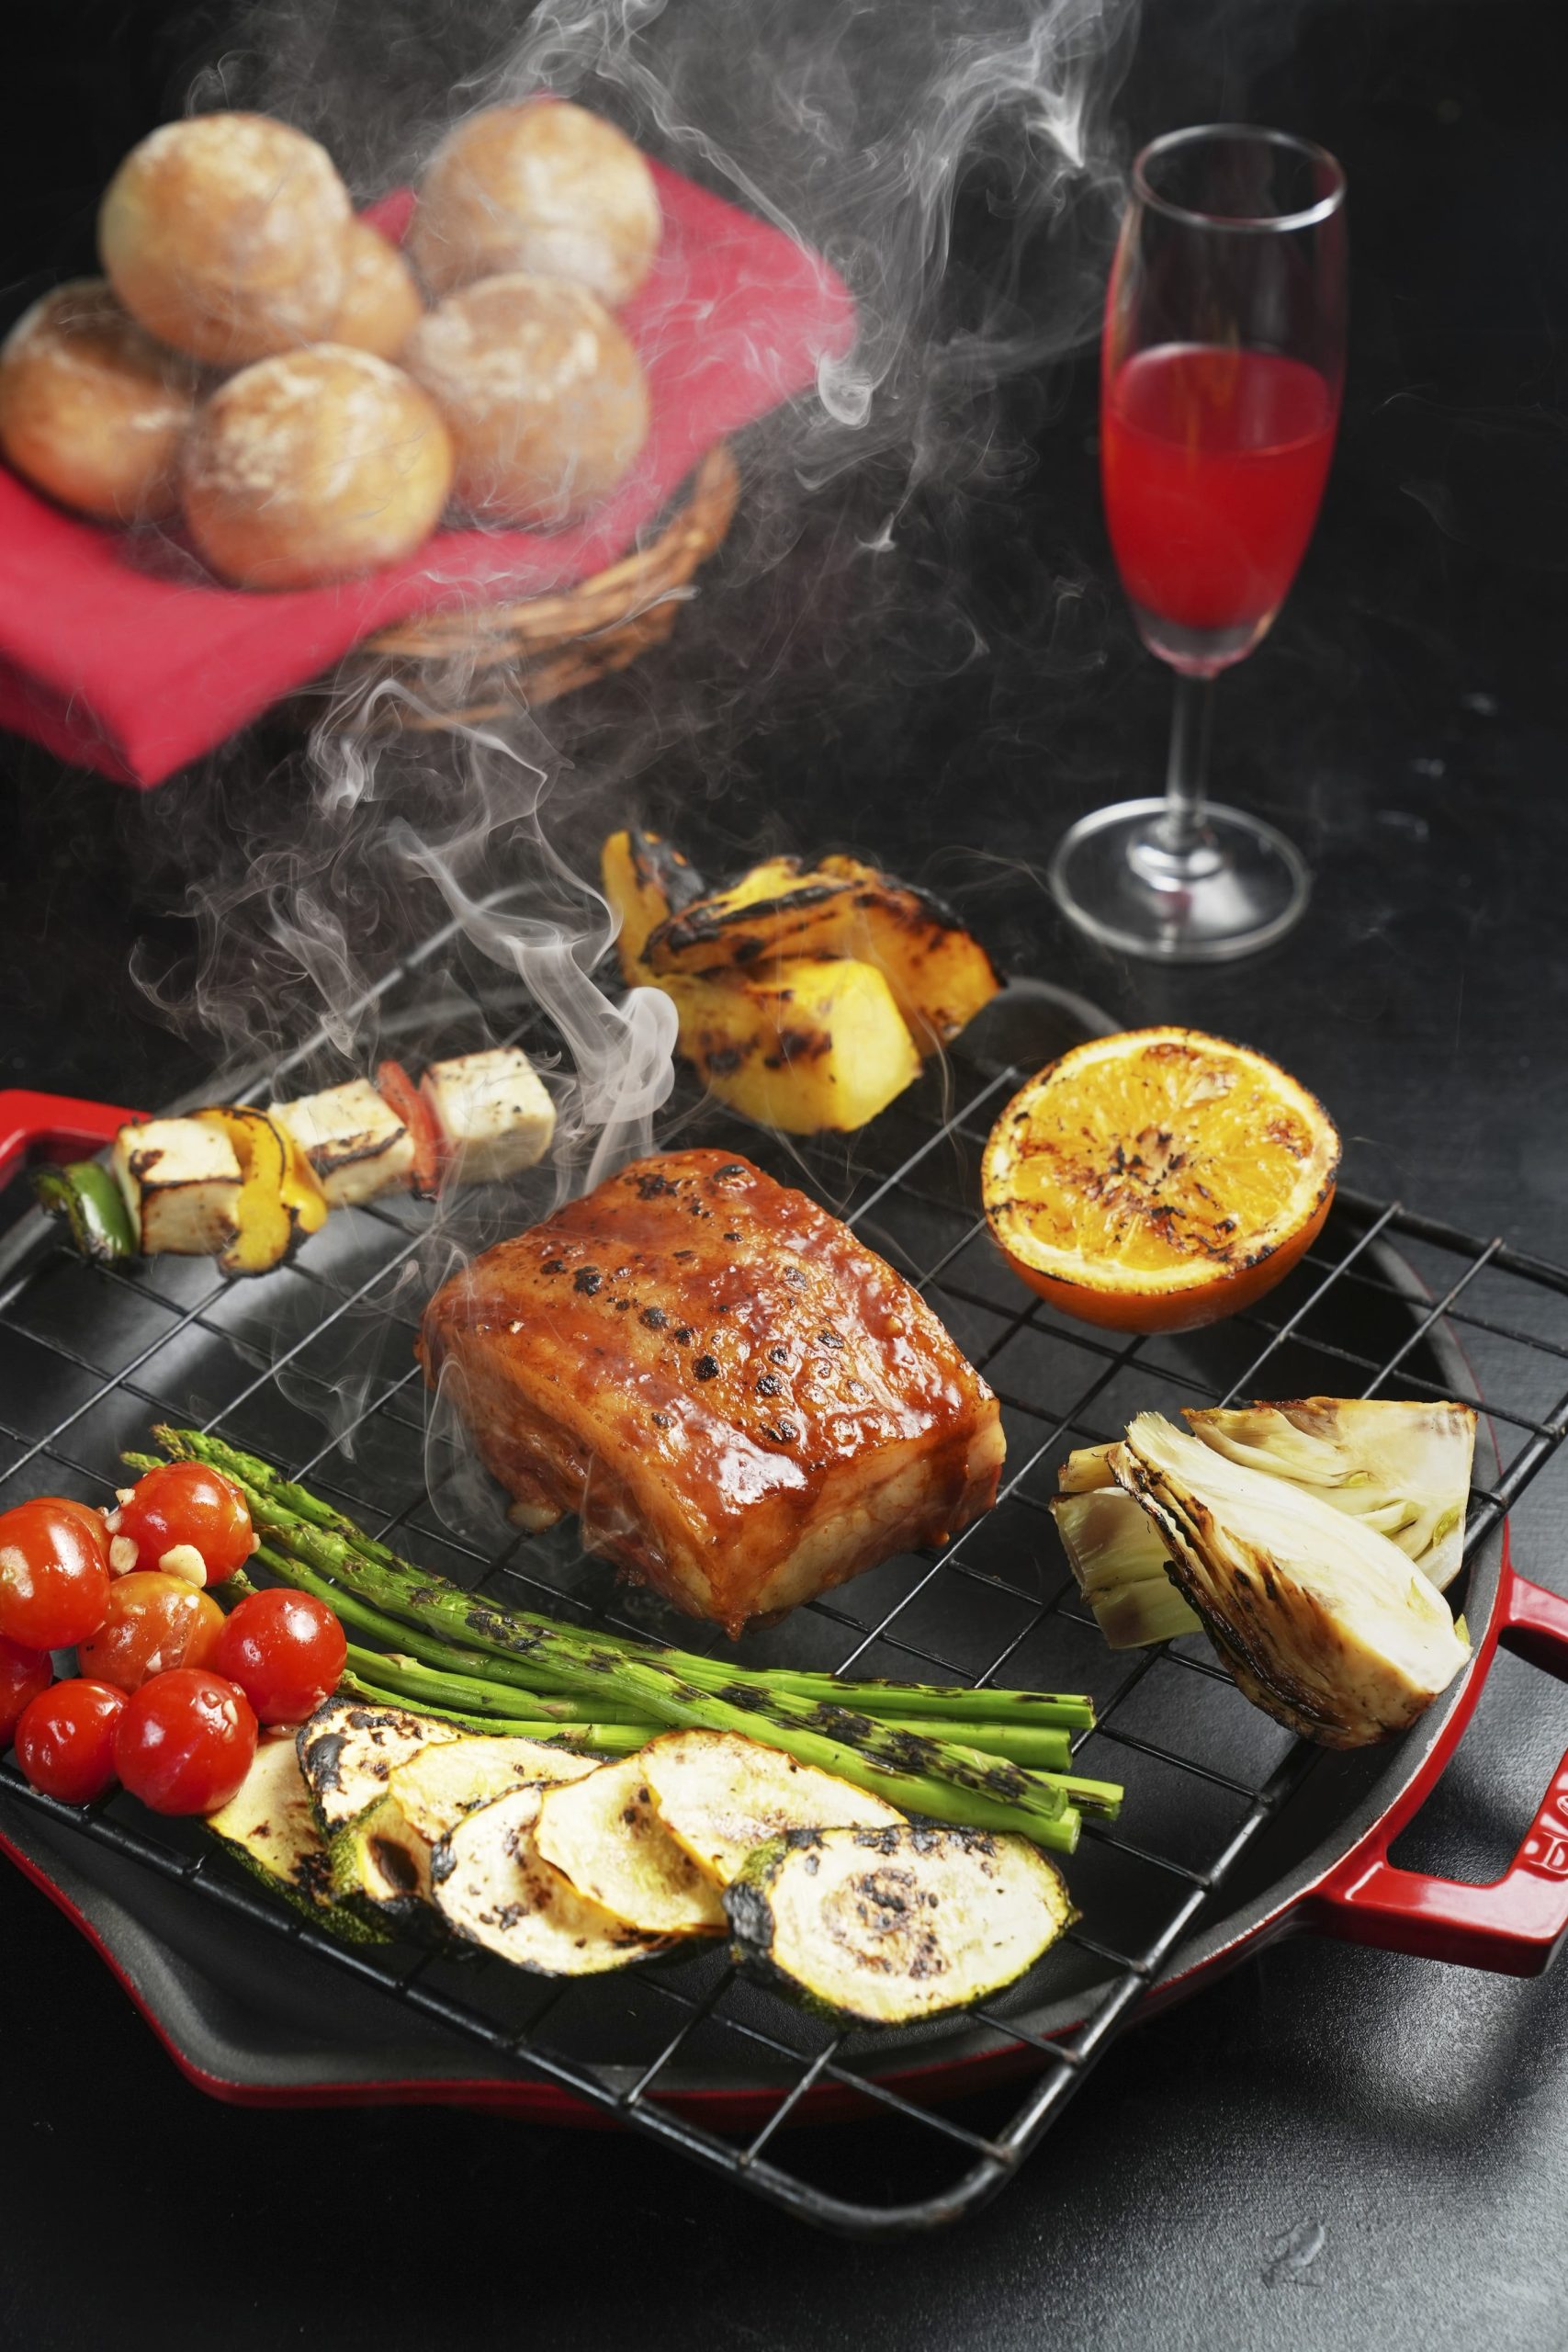 Treat Yourself To A Midweek Indulgence With Gourmet Grills At Sheraton Hyderabad's The Feast